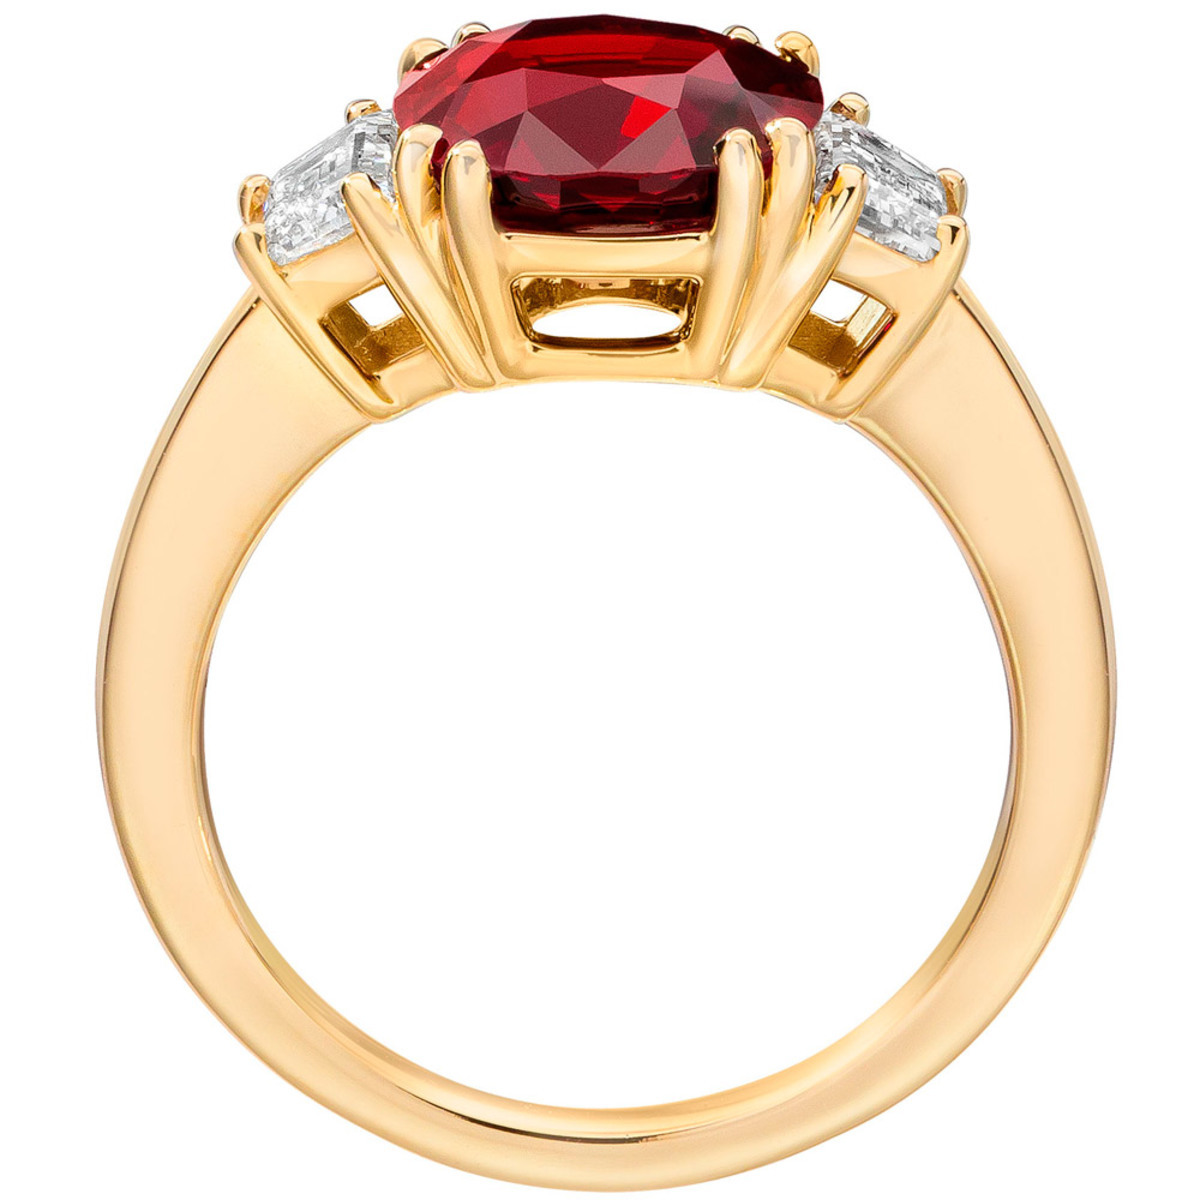 3.94ct Cushion Cut Ruby and 0.71ctw Diamond Ring, 18ct Yellow Gold ...